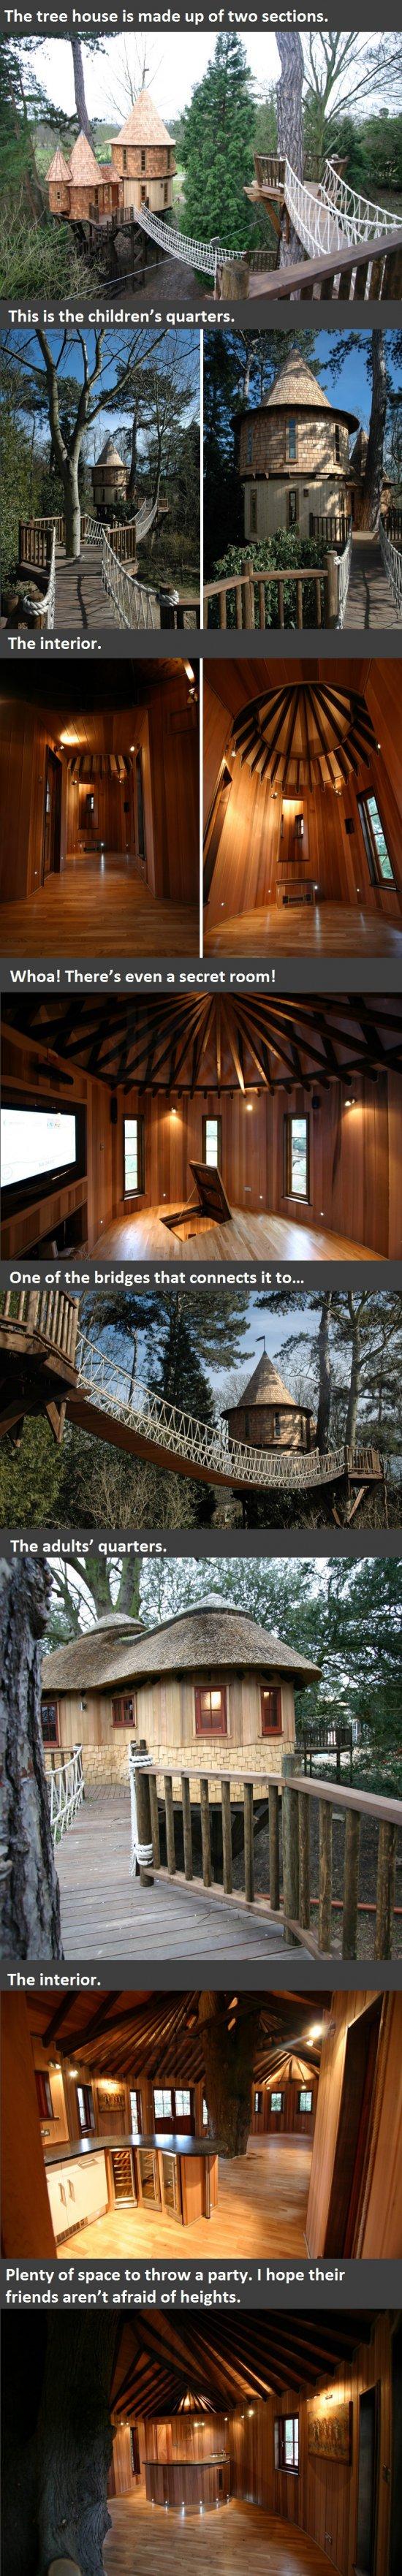 They Live In This Tree House Castle. Cool, Right? Wait Until You See The Interior! -   Misc